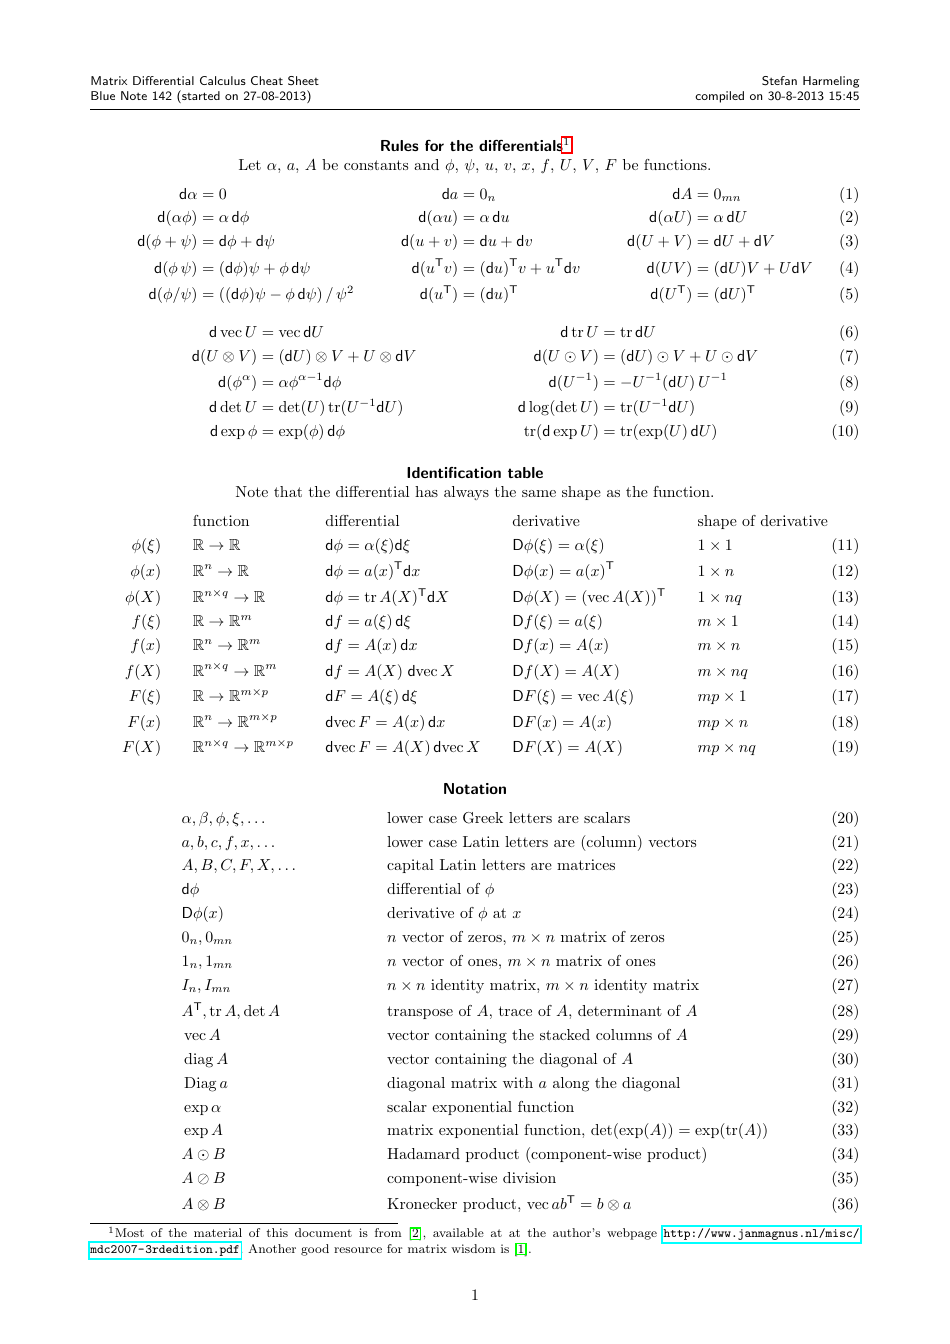 Matrix Differential Calculus Cheat Sheet image preview will help you gain understanding of Stefan Harmeling's comprehensive document instantly.